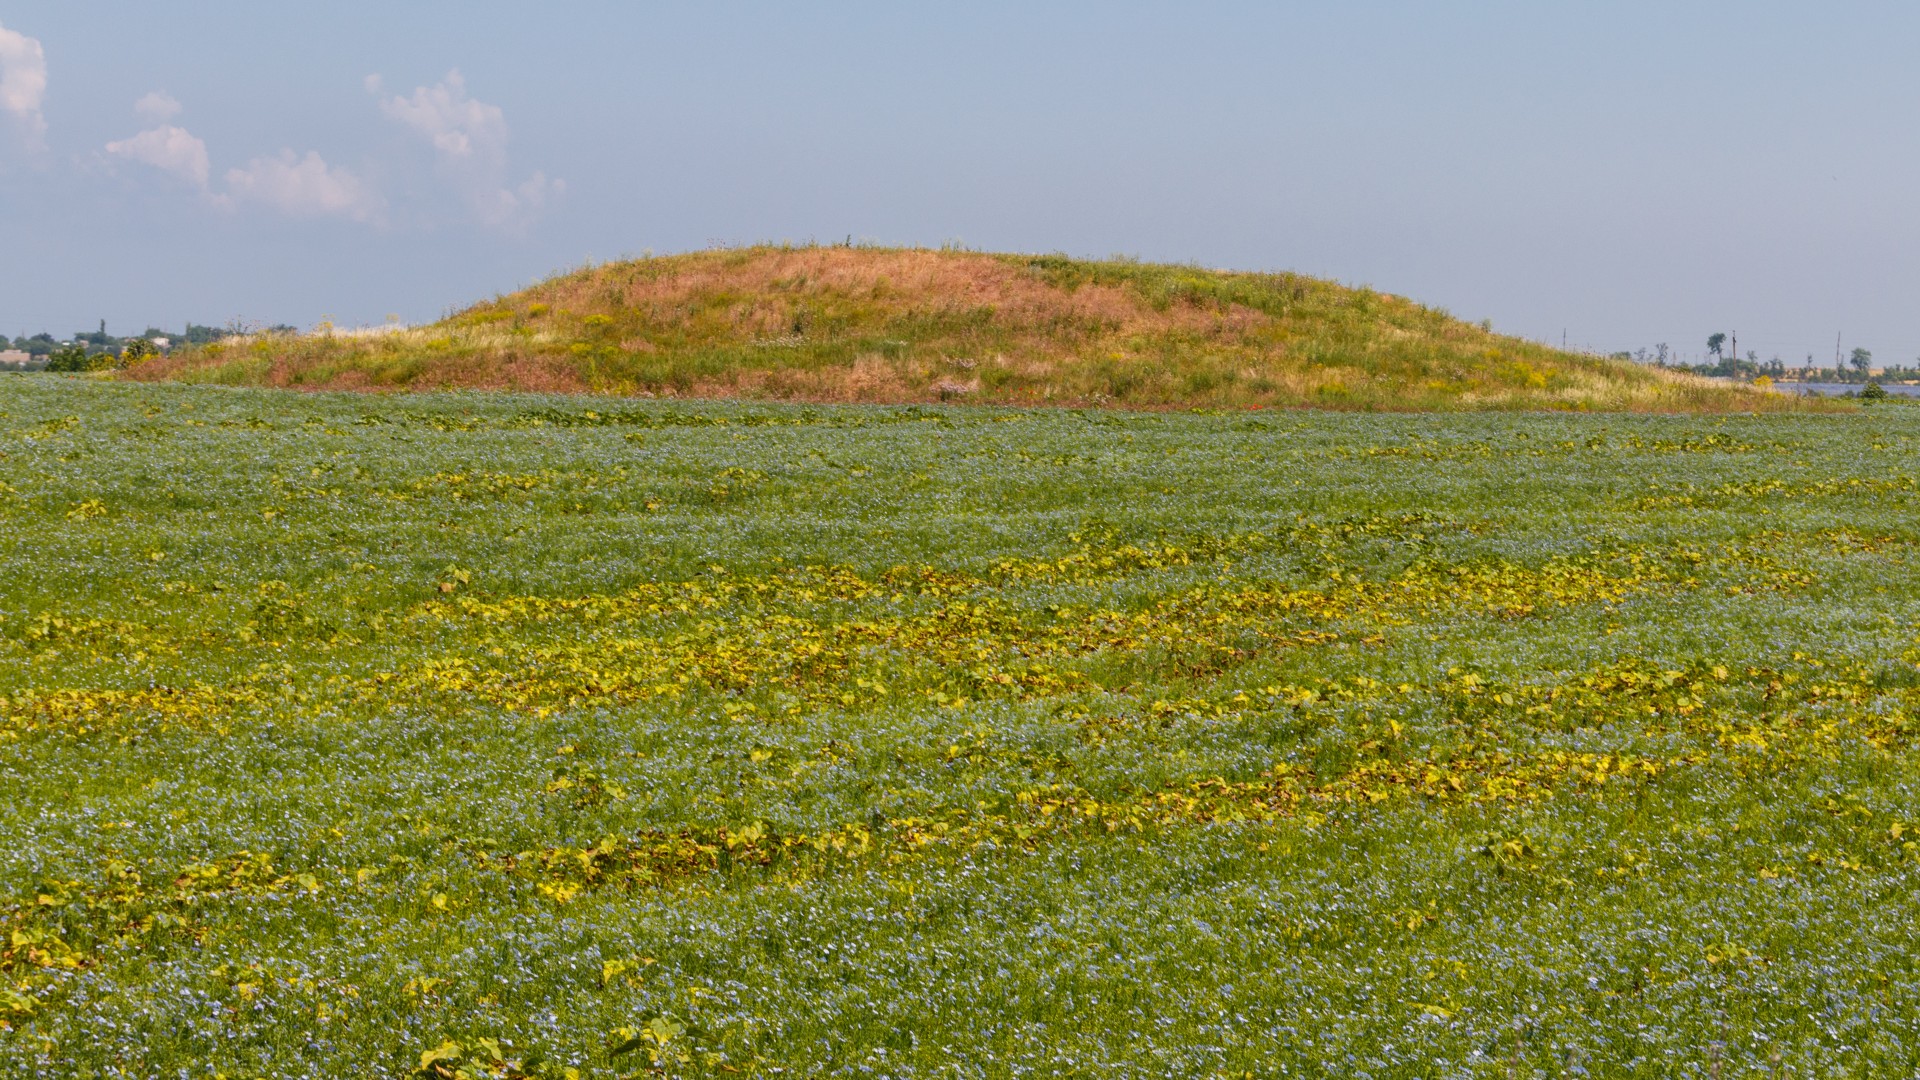 Scythian burial mound in a meadow dotted with yellow flowers in southern Ukraine.